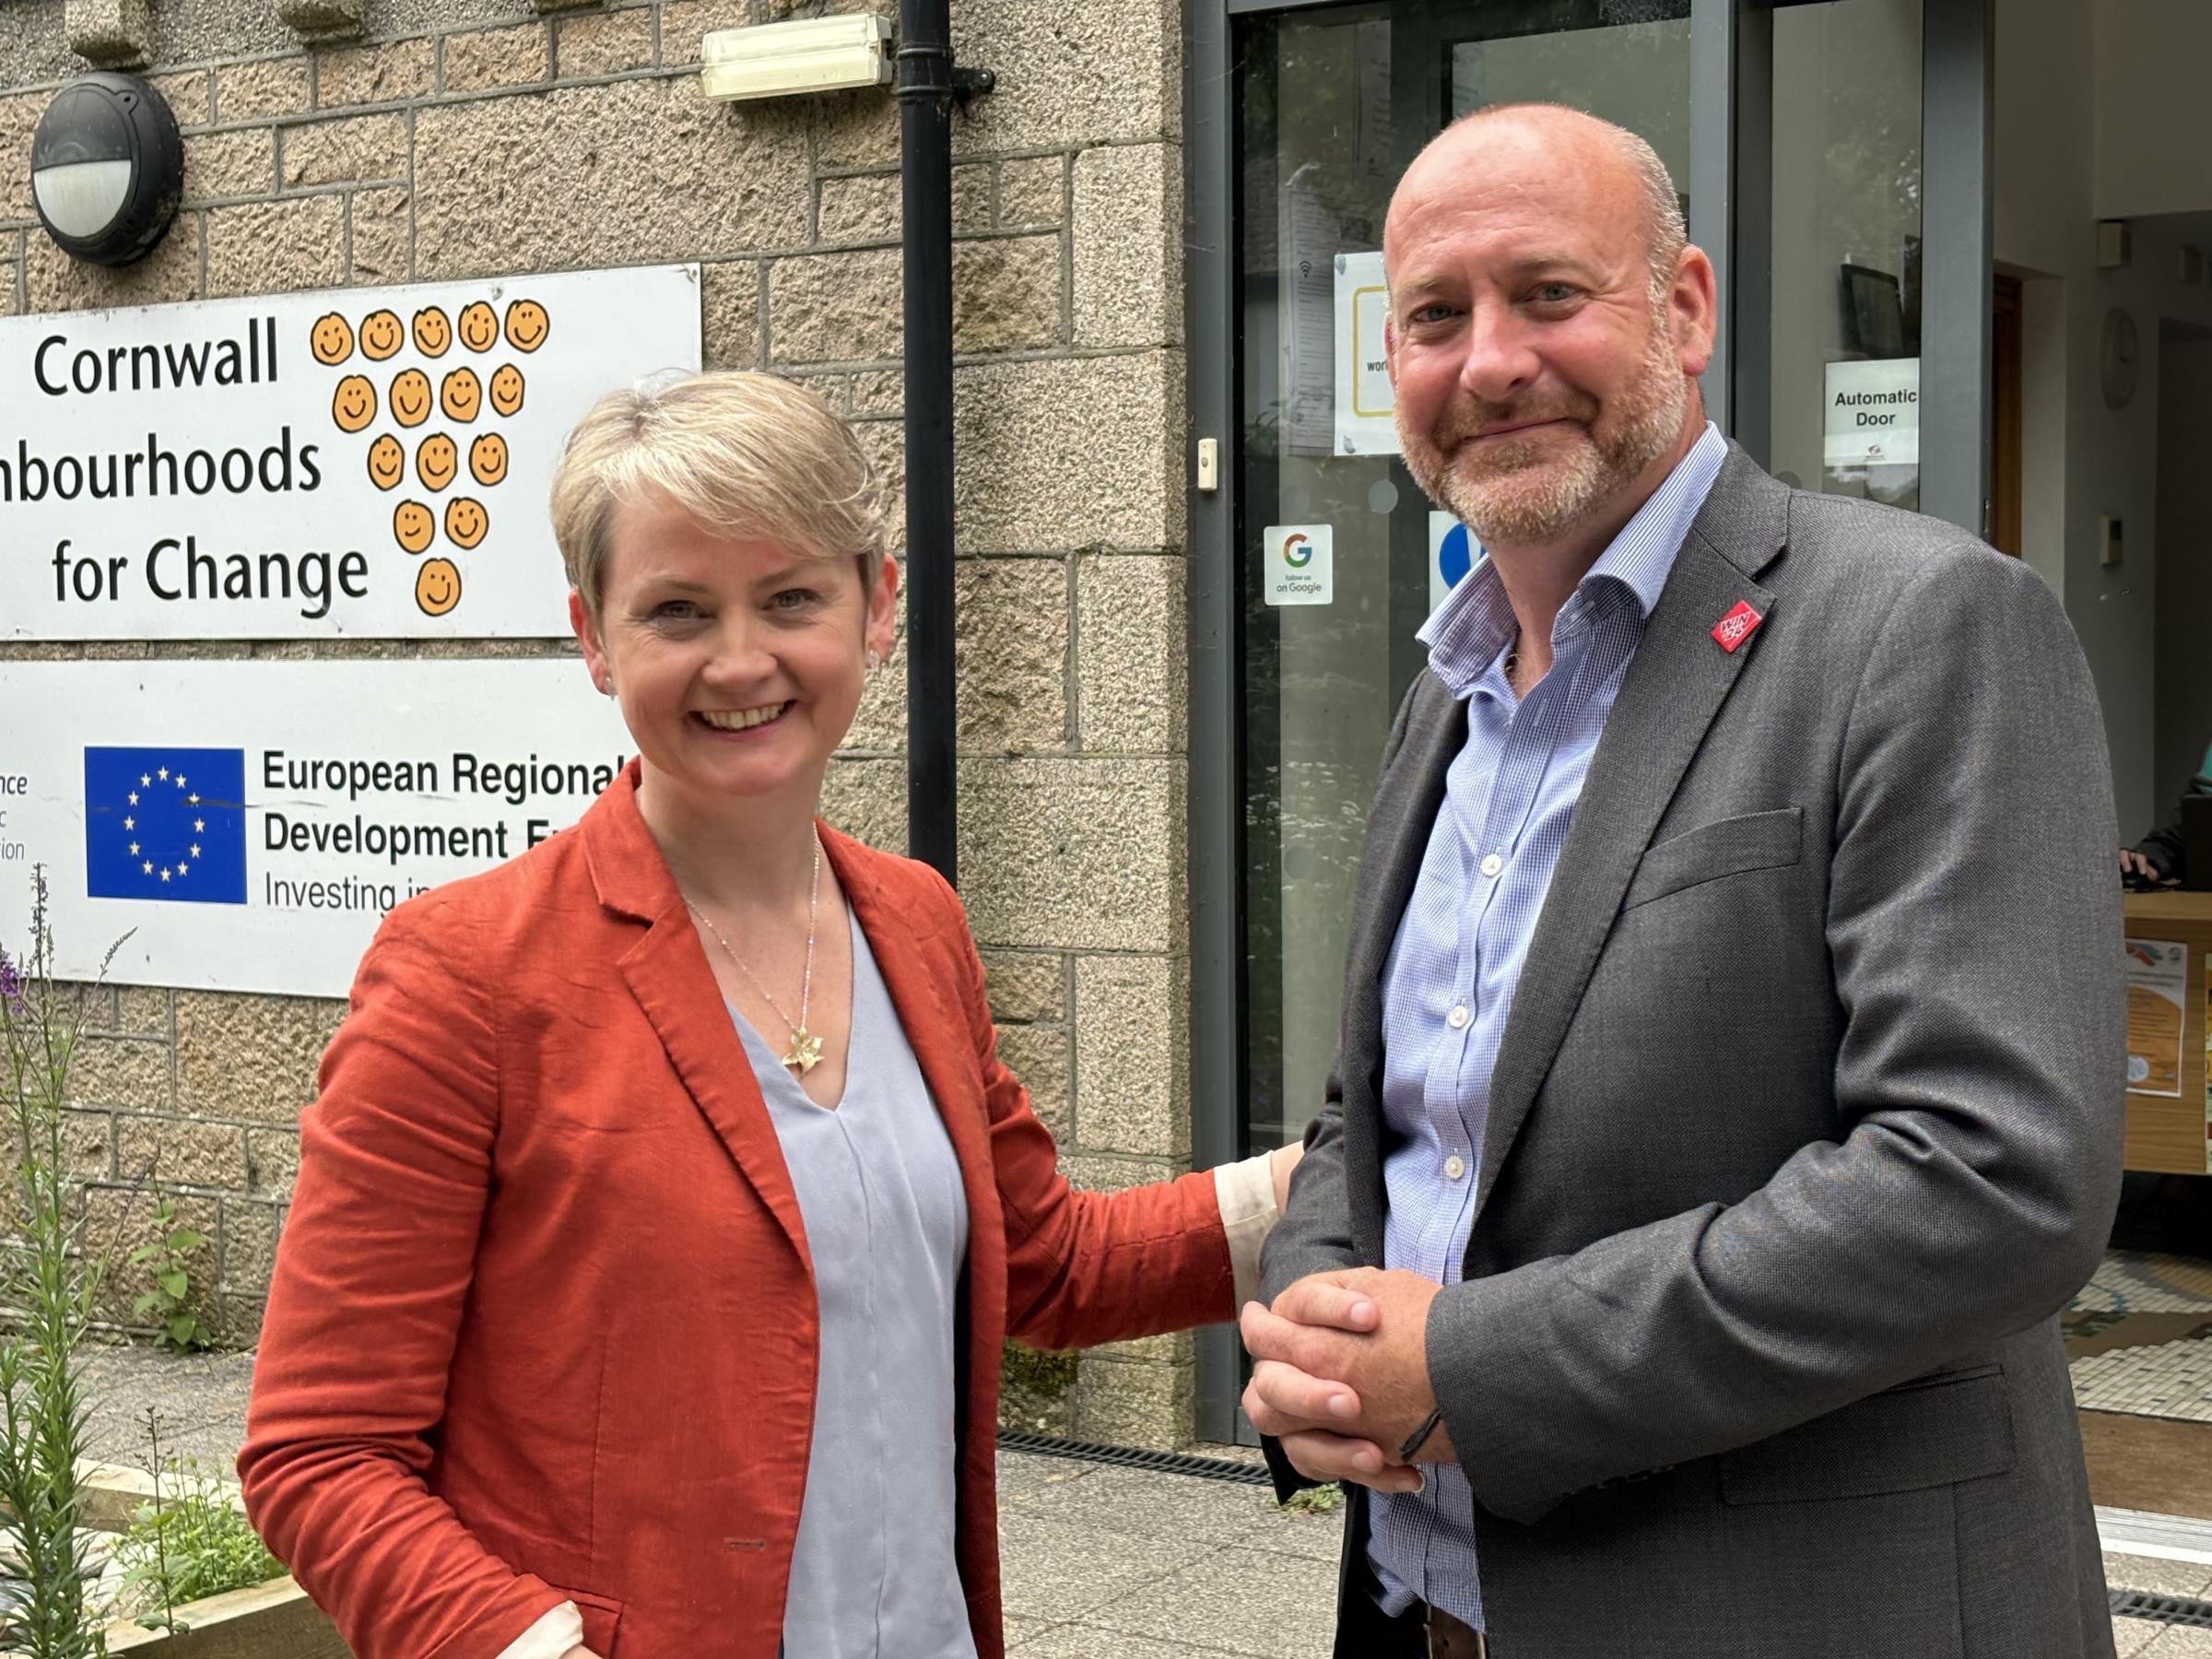 Yvette Cooper, Shadow Secretary of State for the Home Department, with Labour\s candidate for the Camborne and Redruth seat Perran Moon pictured in Redruth (Pic: Lee Trewhela / LDRS)